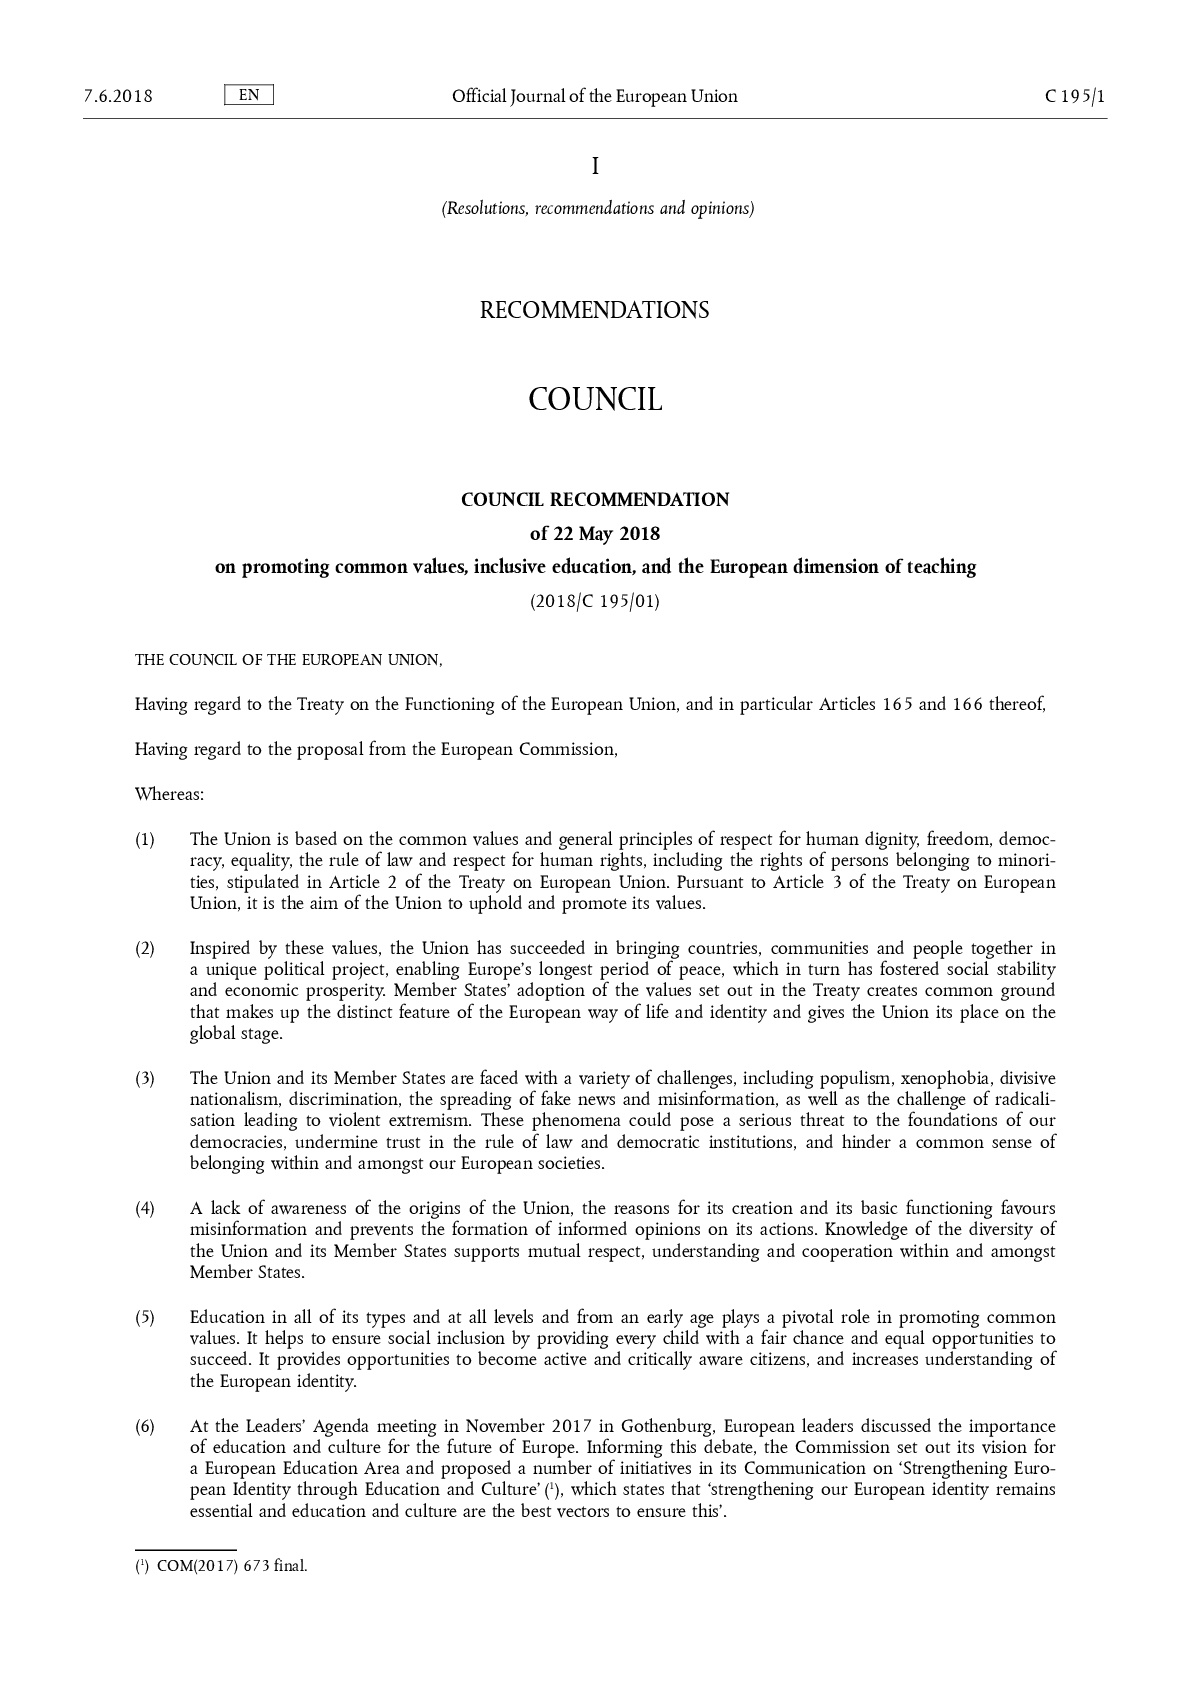 COUNCIL RECOMMENDATION of 22 May 2018 on promoting common values, inclusive education, and the European dimension of teaching (2018/C 195/01)